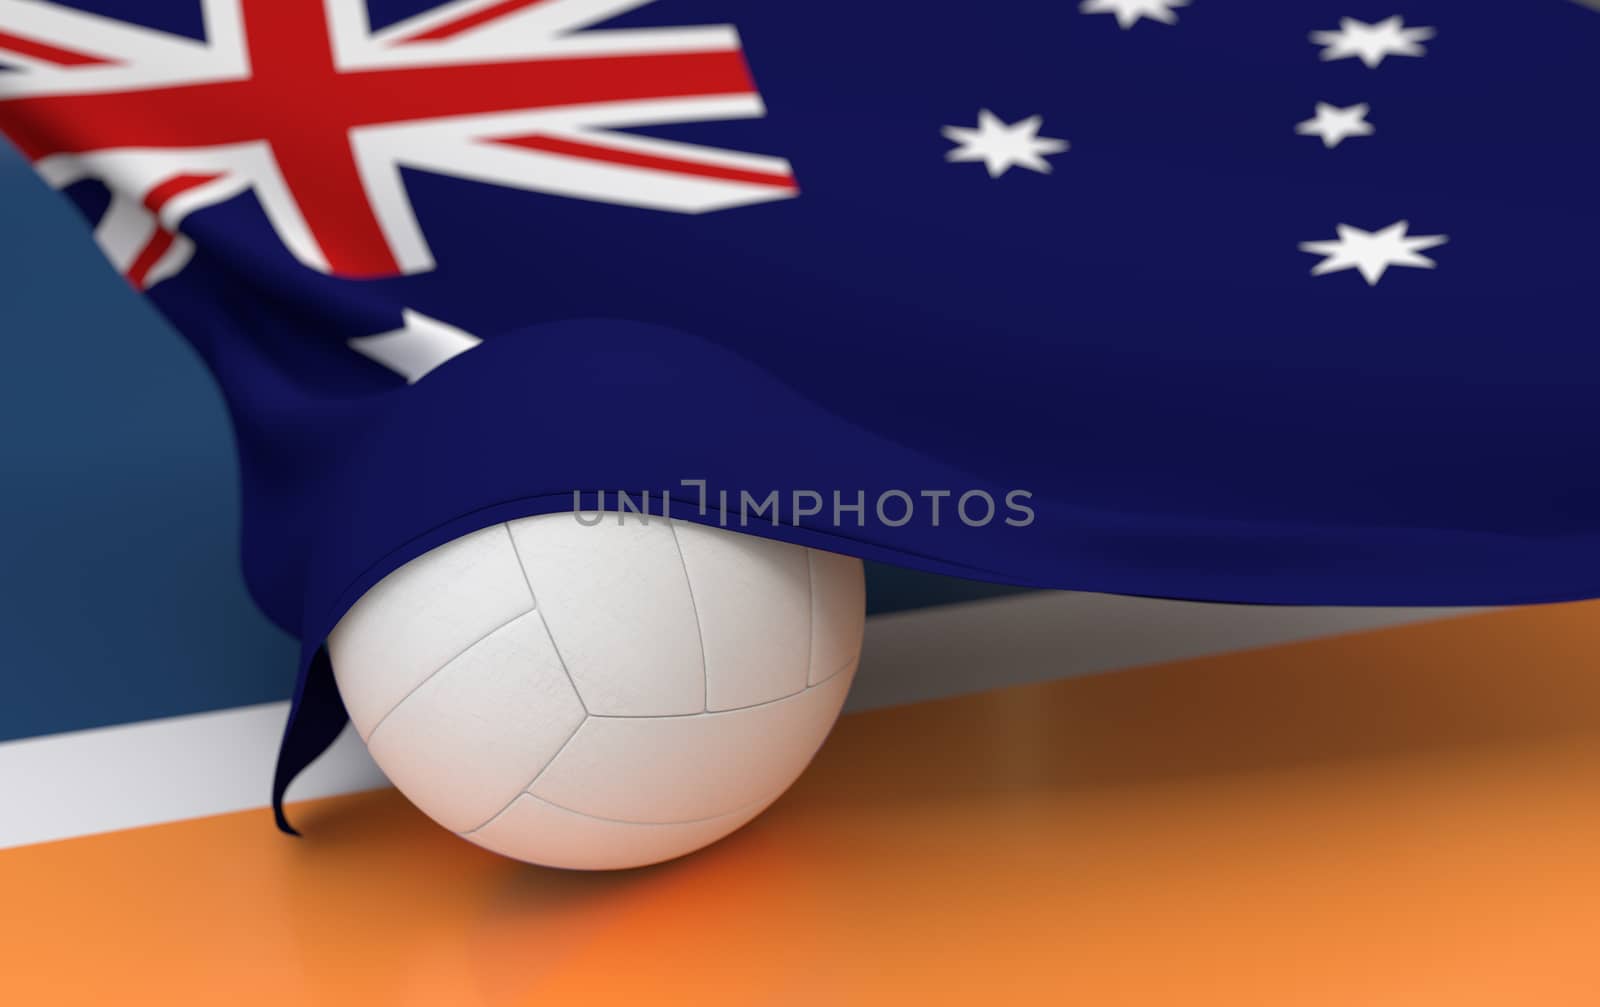 Flag of Australia with championship volleyball ball by Barbraford